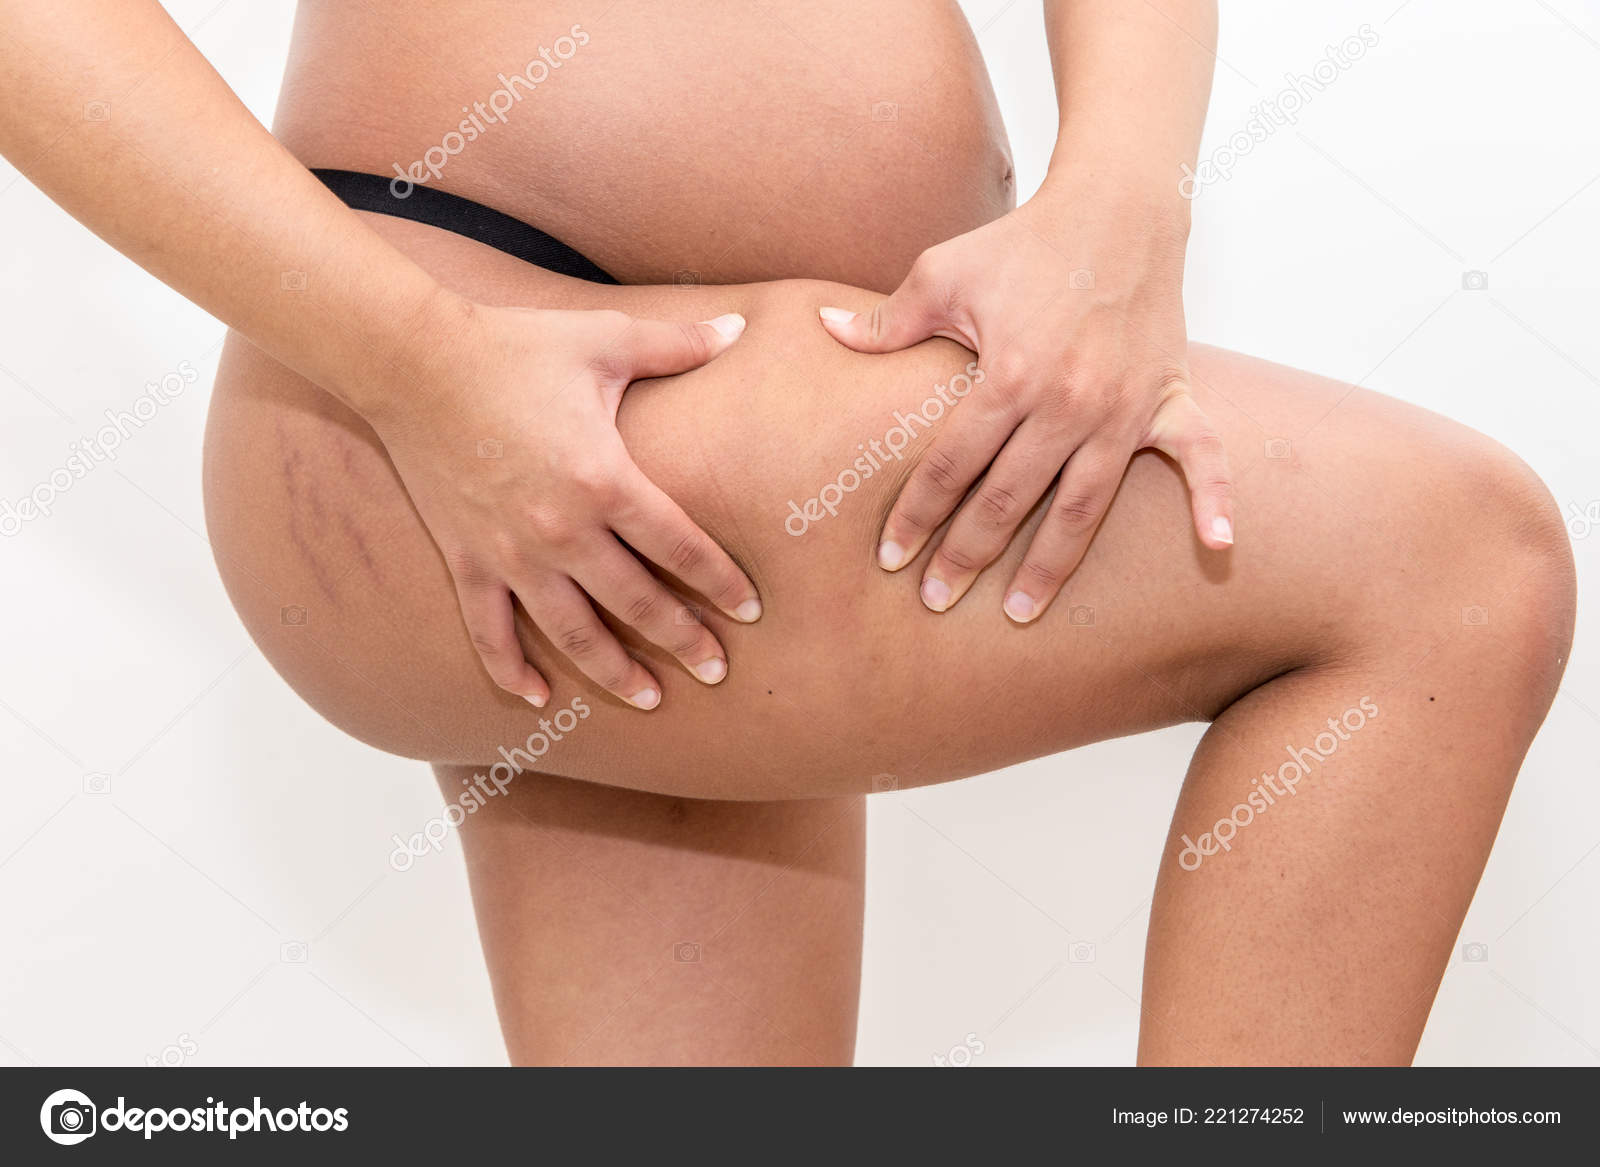 Download pictures from the photo stock library ⚡... Closeup of a pregnant w...